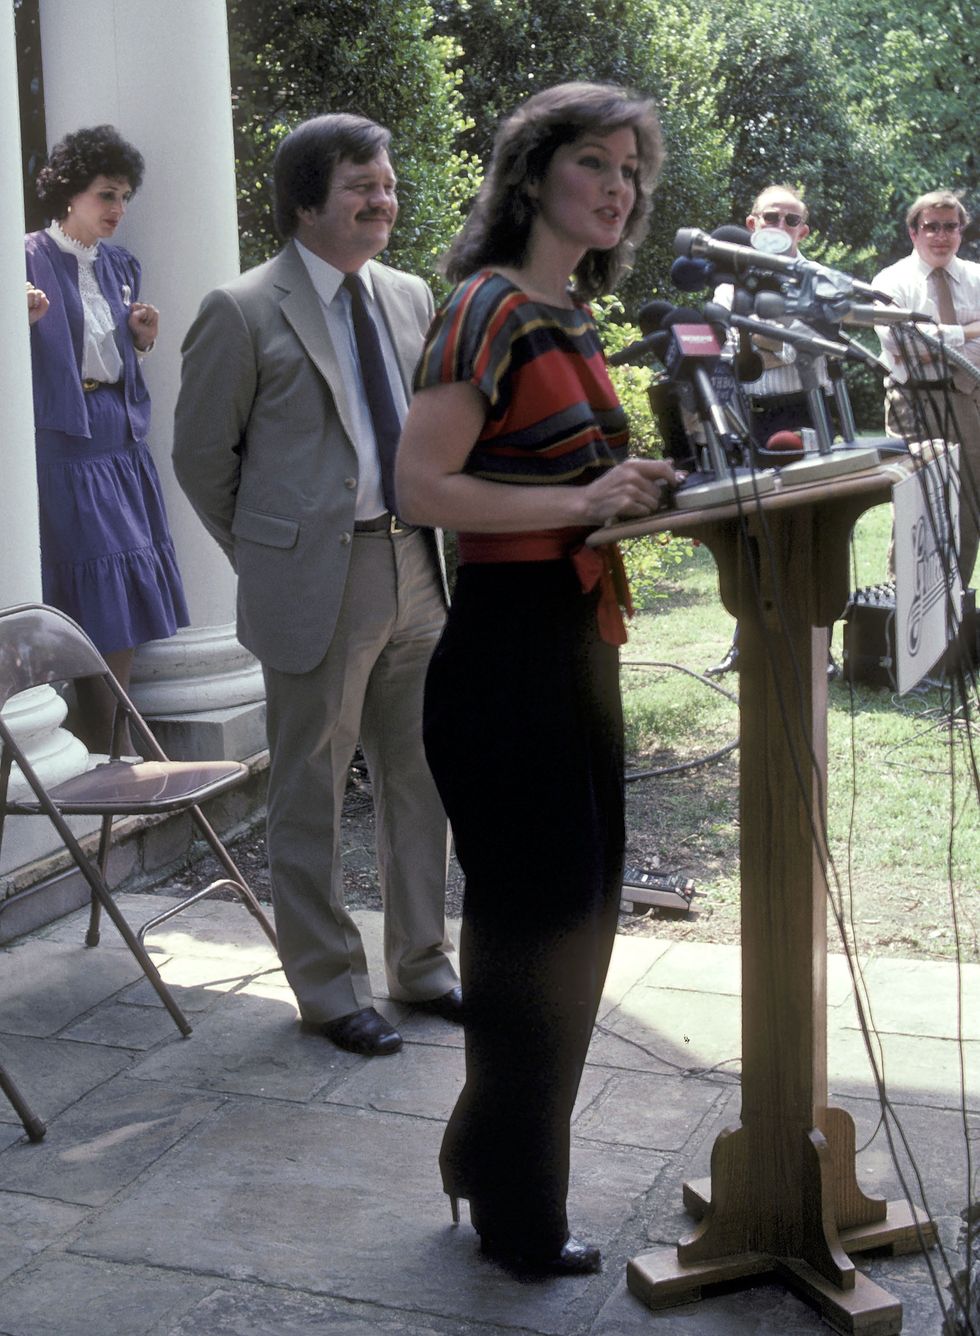 priscilla presley gives a press conference to announce elvis presley's home, graceland mansion, will open to the public on june 7, 1982 as a memorial museum